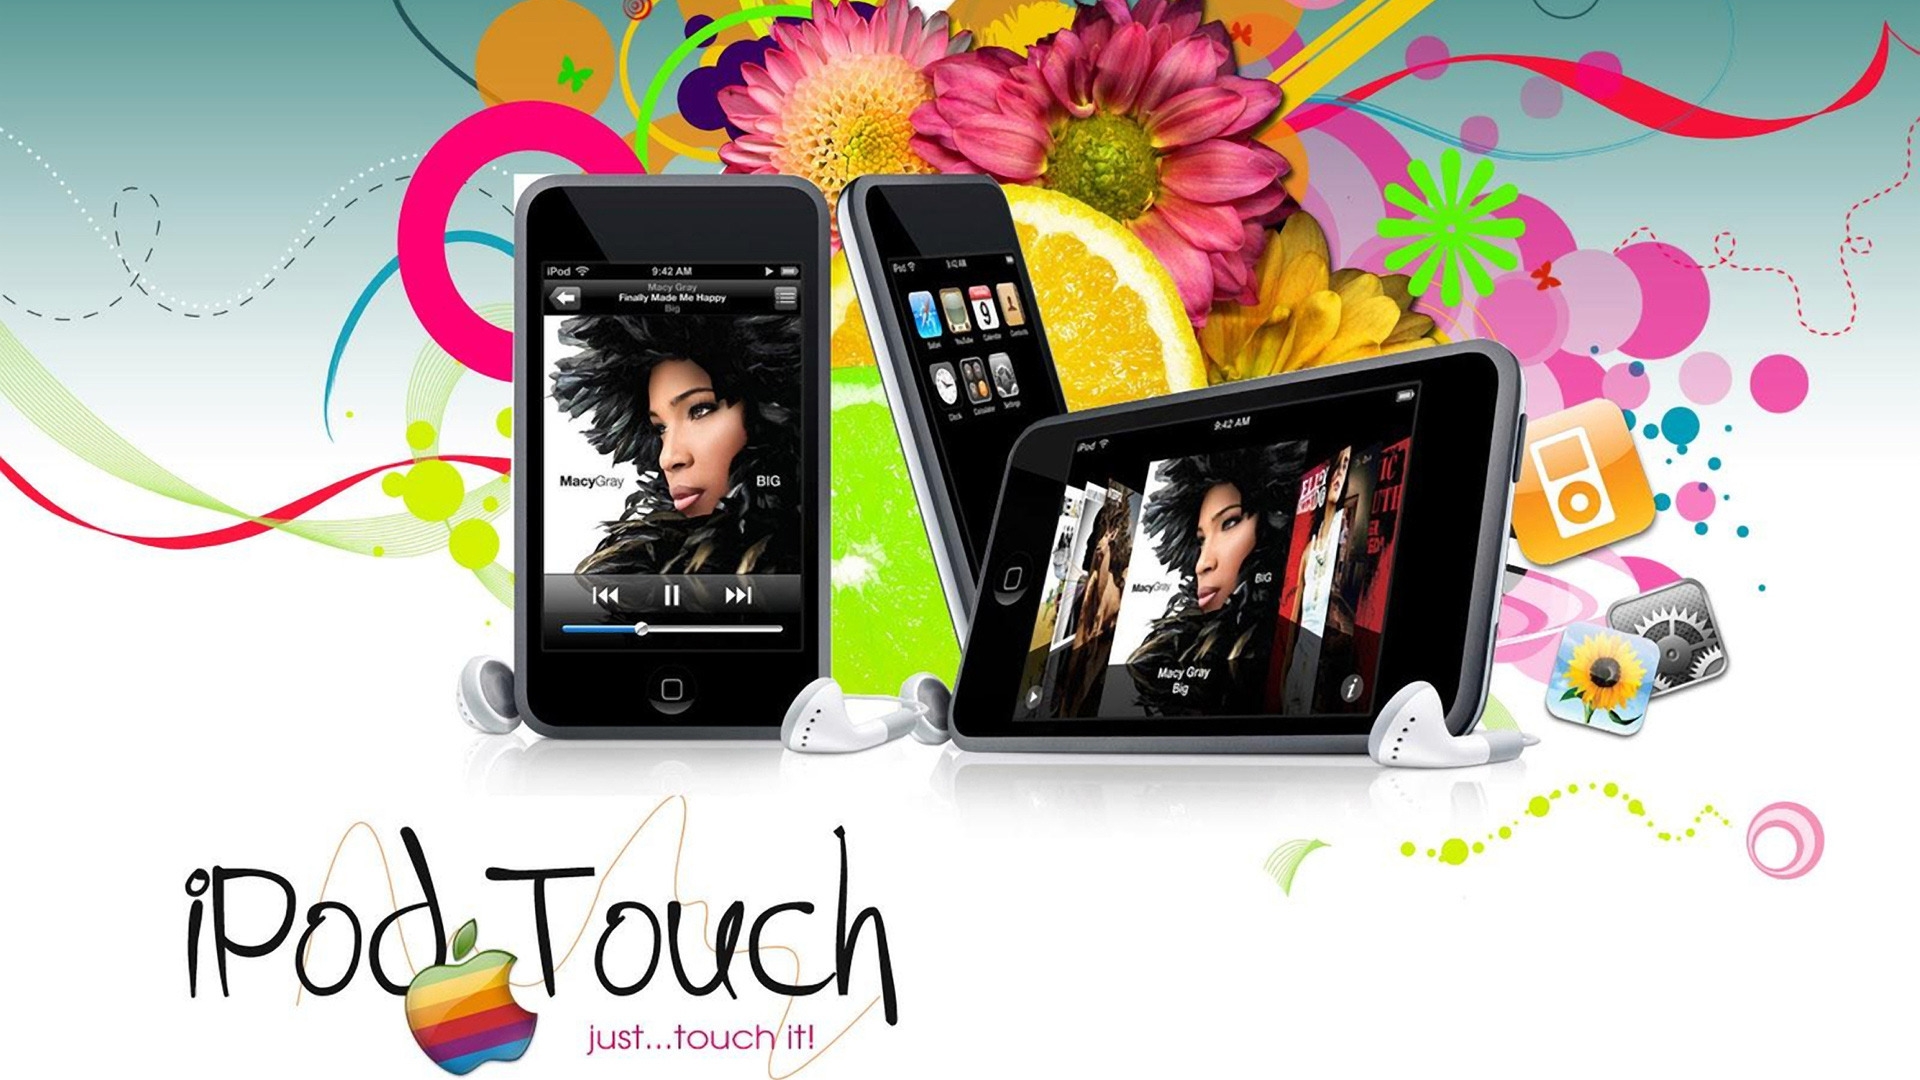 iPod Touch for 1920 x 1080 HDTV 1080p resolution